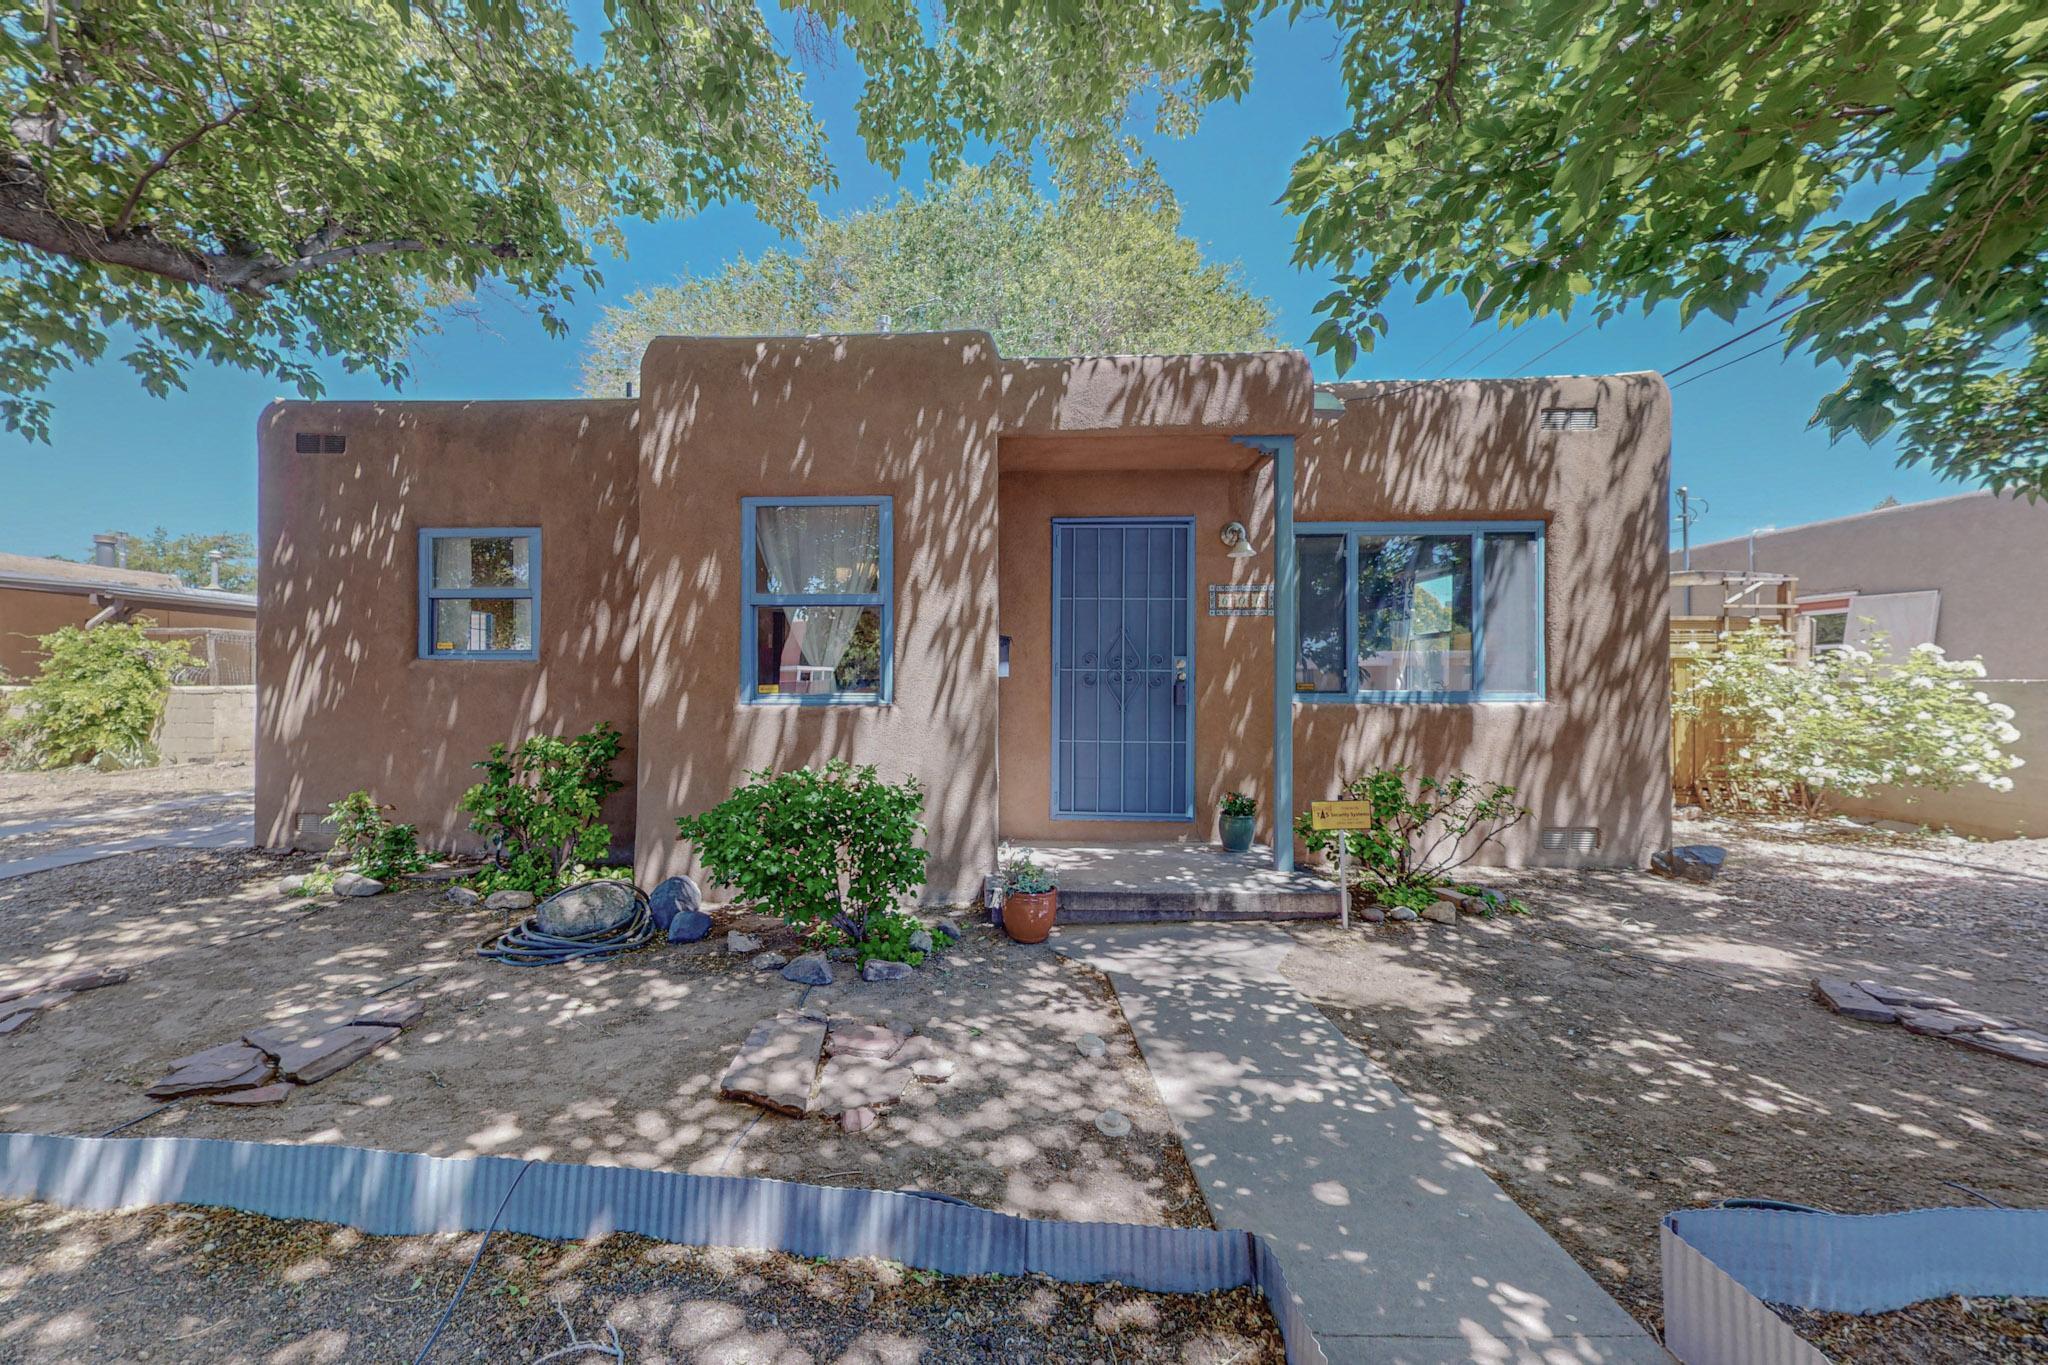 Adorable 2 Bedroom/ 1 Bathroom/ 1 Car Garage, 870 SF home in Parkland Hills, adjacent to Nob Hill, easy access to Downtown/Uptown/Airport/Kirtland AFB/Sandia Labs/UNM. Lightly traveled street. Hardwood floors refinished in 2018. The kitchen has lots of cabinet space, built in microwave, dishwasher and gas stove; the kitchen lighting and appliances were updated in 2017. A master cool evaporative cooling system, garage door and washer/dryer were replaced in 2018. New water line 2019, 200-amp electric 2018. A TPO roof installed 2024! The property was landscaped and beautiful gates installed in 2018, and an irrigation system set up in 2019 that has four zones. Relax in thie beautiful backyard on the shady west side of the home and enjoy the lovely flower garden and Fruit Trees!